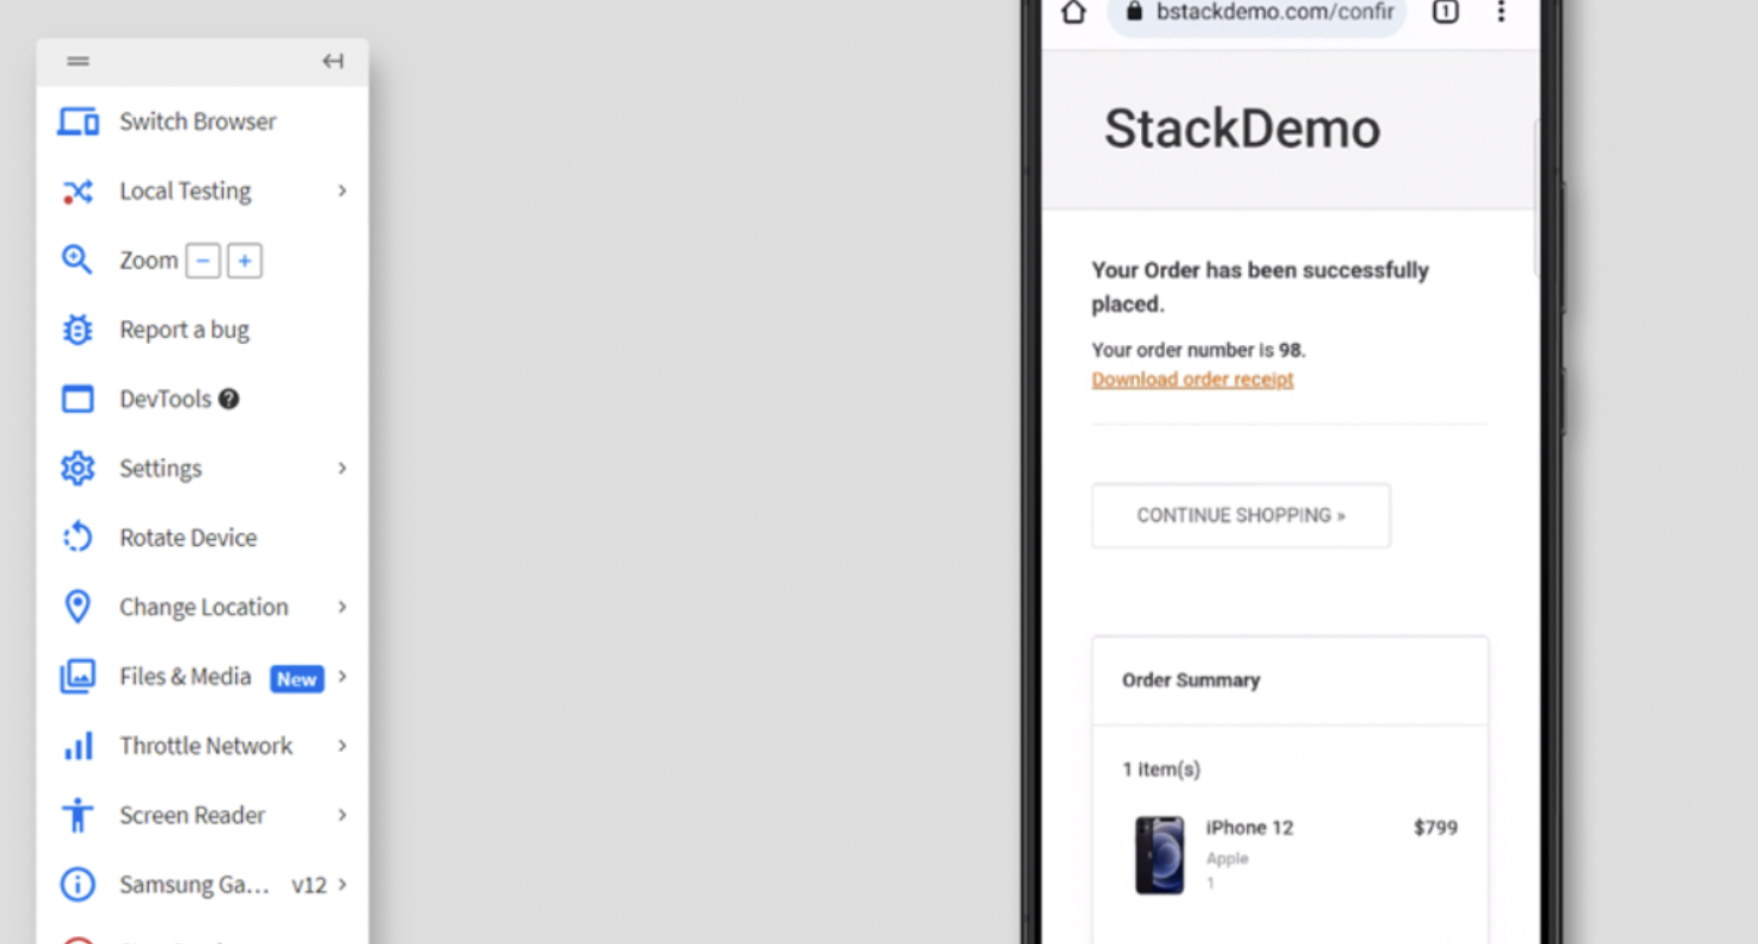 Running UI Automation Test on BrowserStack Live